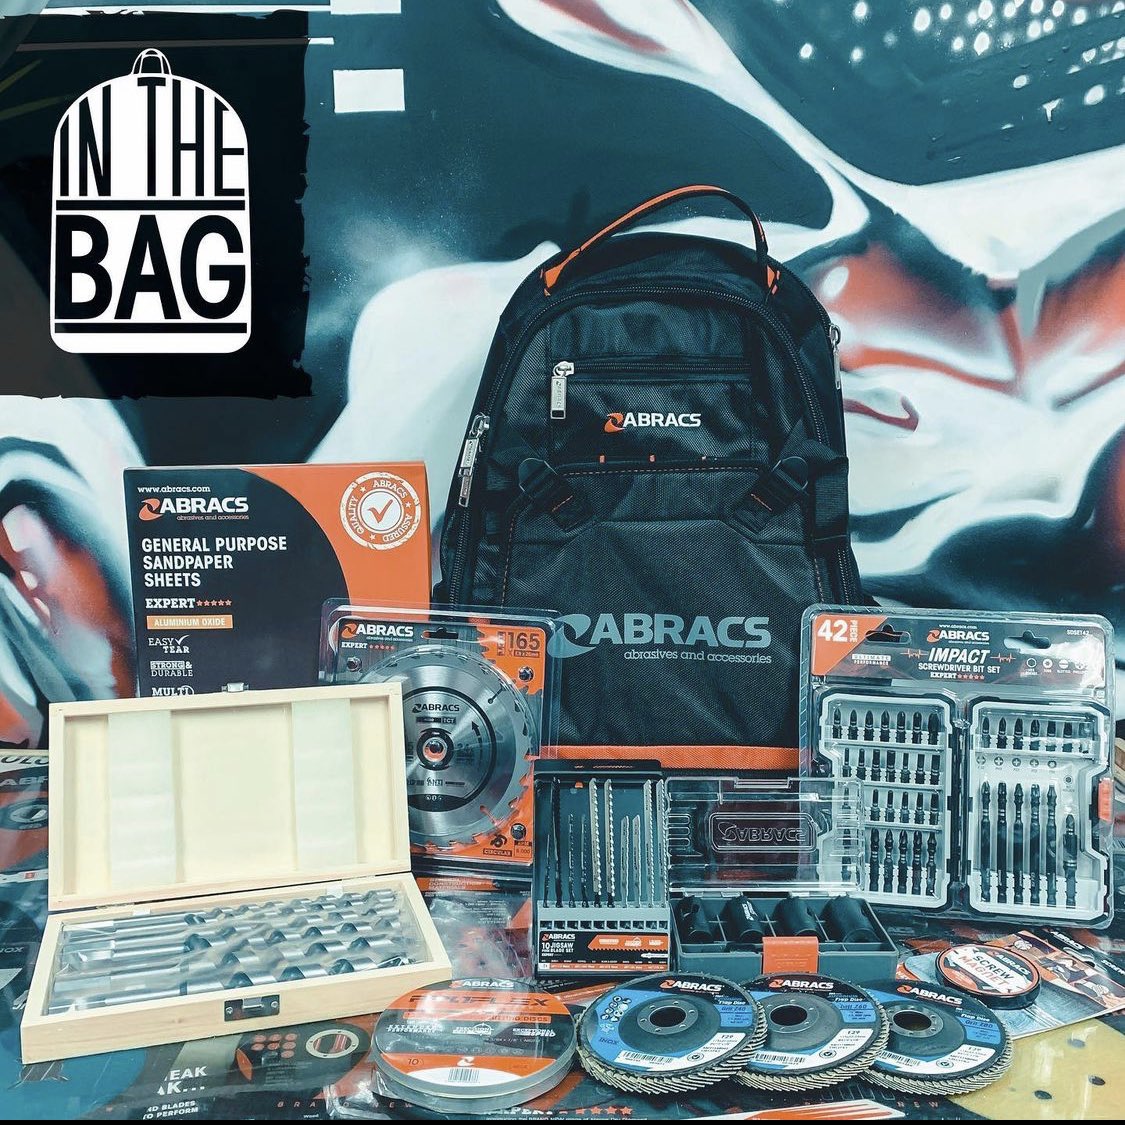 IT’S BACK! To coincide with our long awaited return to the toolfair we are being back IN THE BAG 🎉 Your chance to win all of the products you can see below…🤯 To enter: 1️⃣ Like & Retweet! 2️⃣ Follow @Abracs_ltd Winner Announced 01.10.21 10am GOOD LUCK!🤞🎉